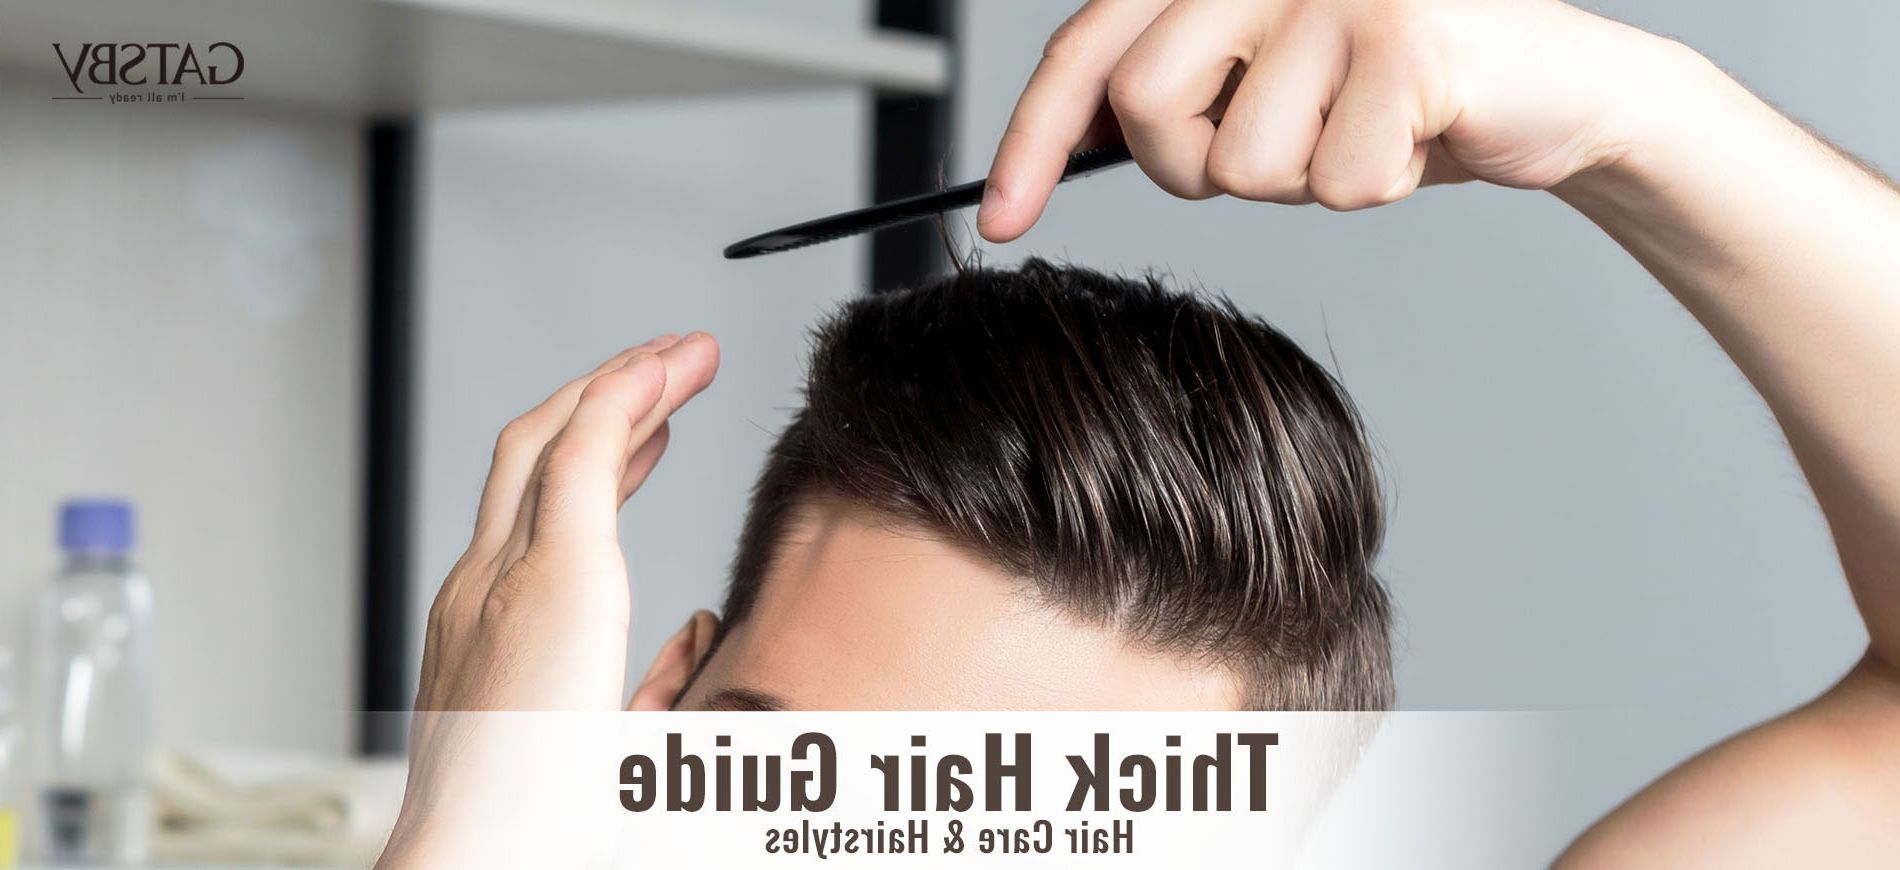 Thick Hair Guide For Mengatsby: Hair Care & Hairstyles Intended For Easy Sleek Hairstyle For Thick Hair (View 18 of 25)